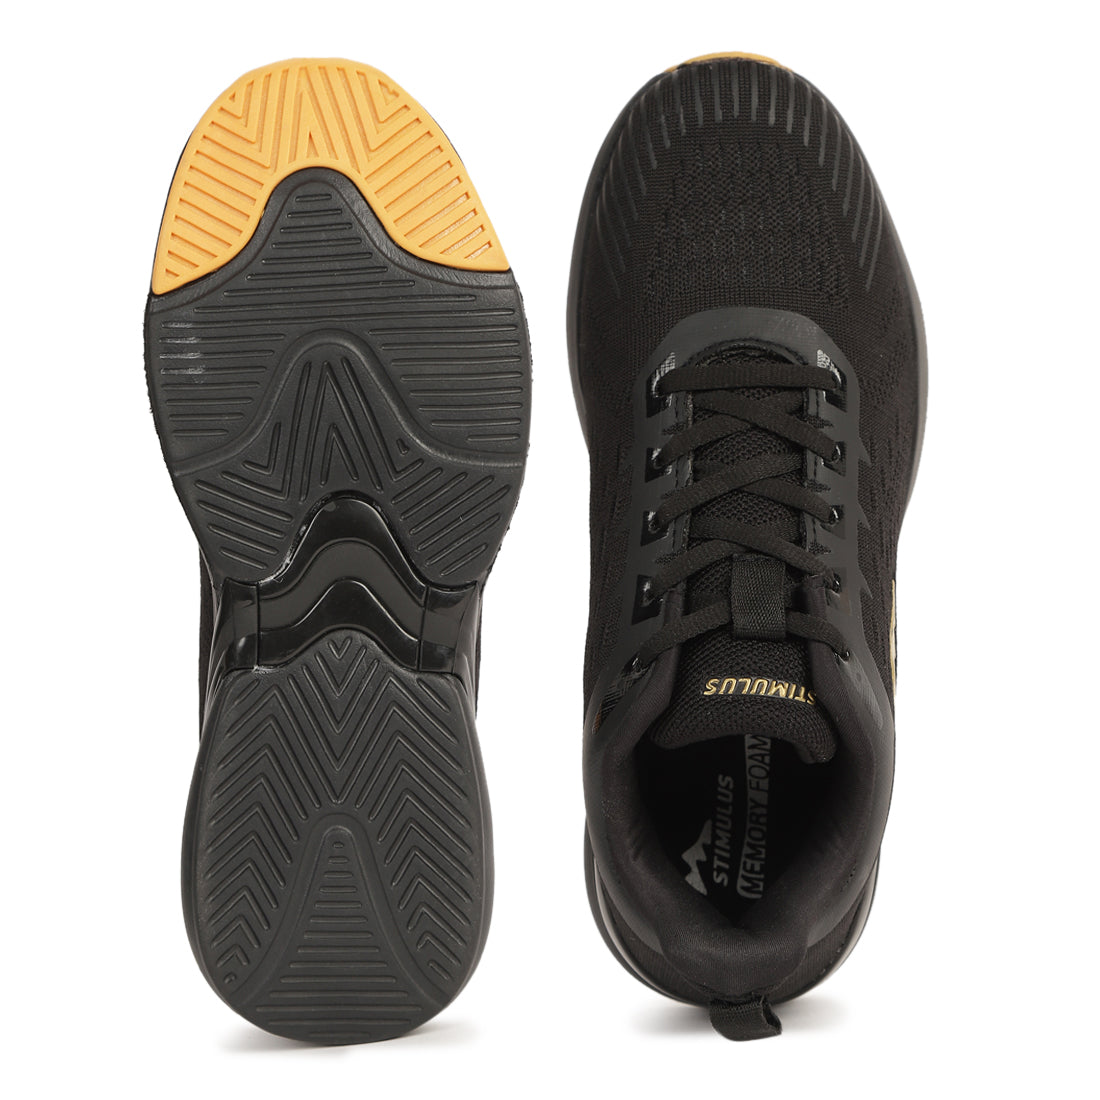 Paragon Stimulus Black and Gold Casual Running Shoes for Men